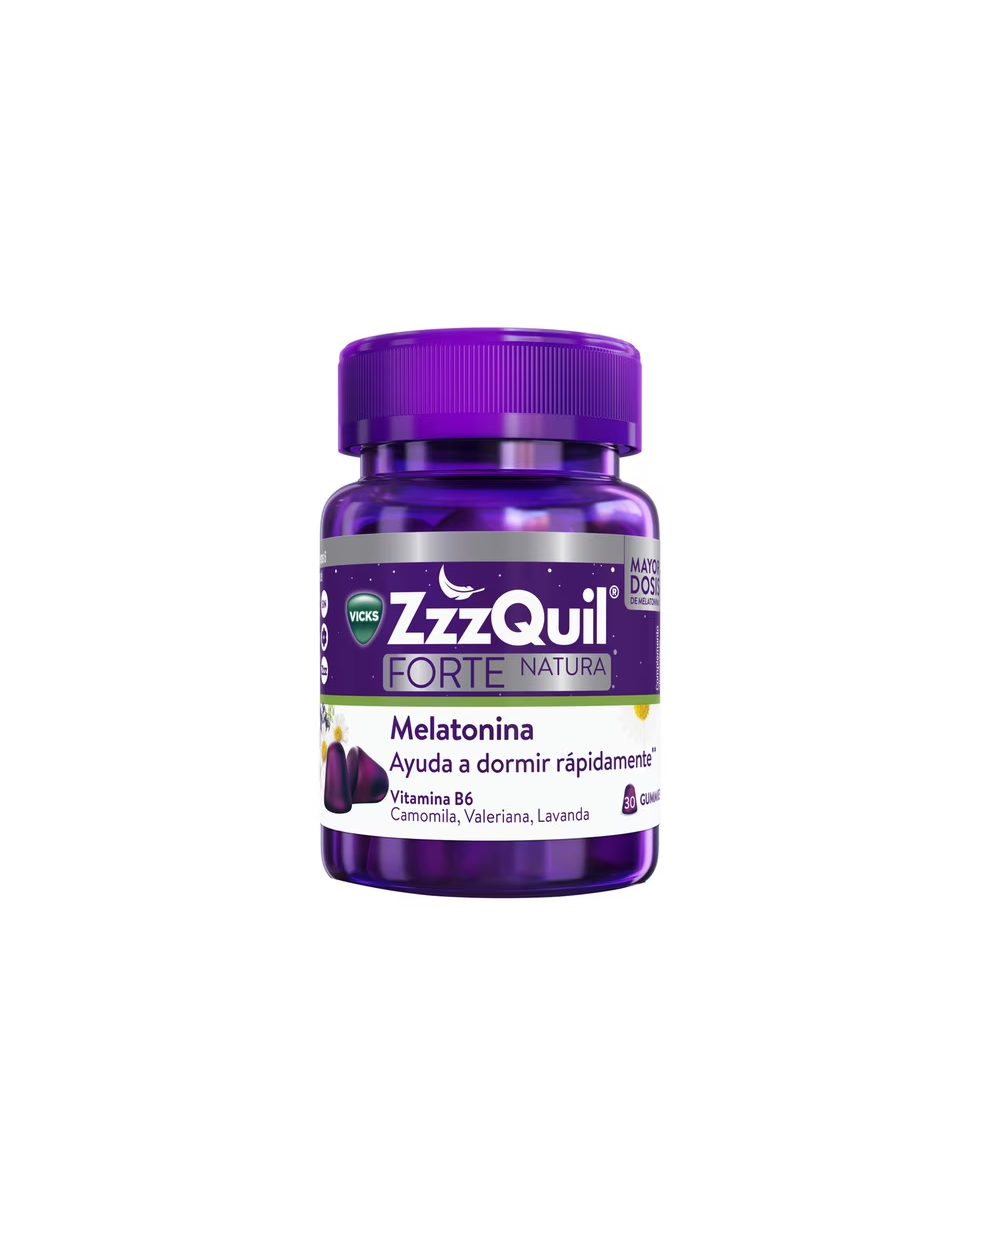 Zzzquil forte natura 30 gummies